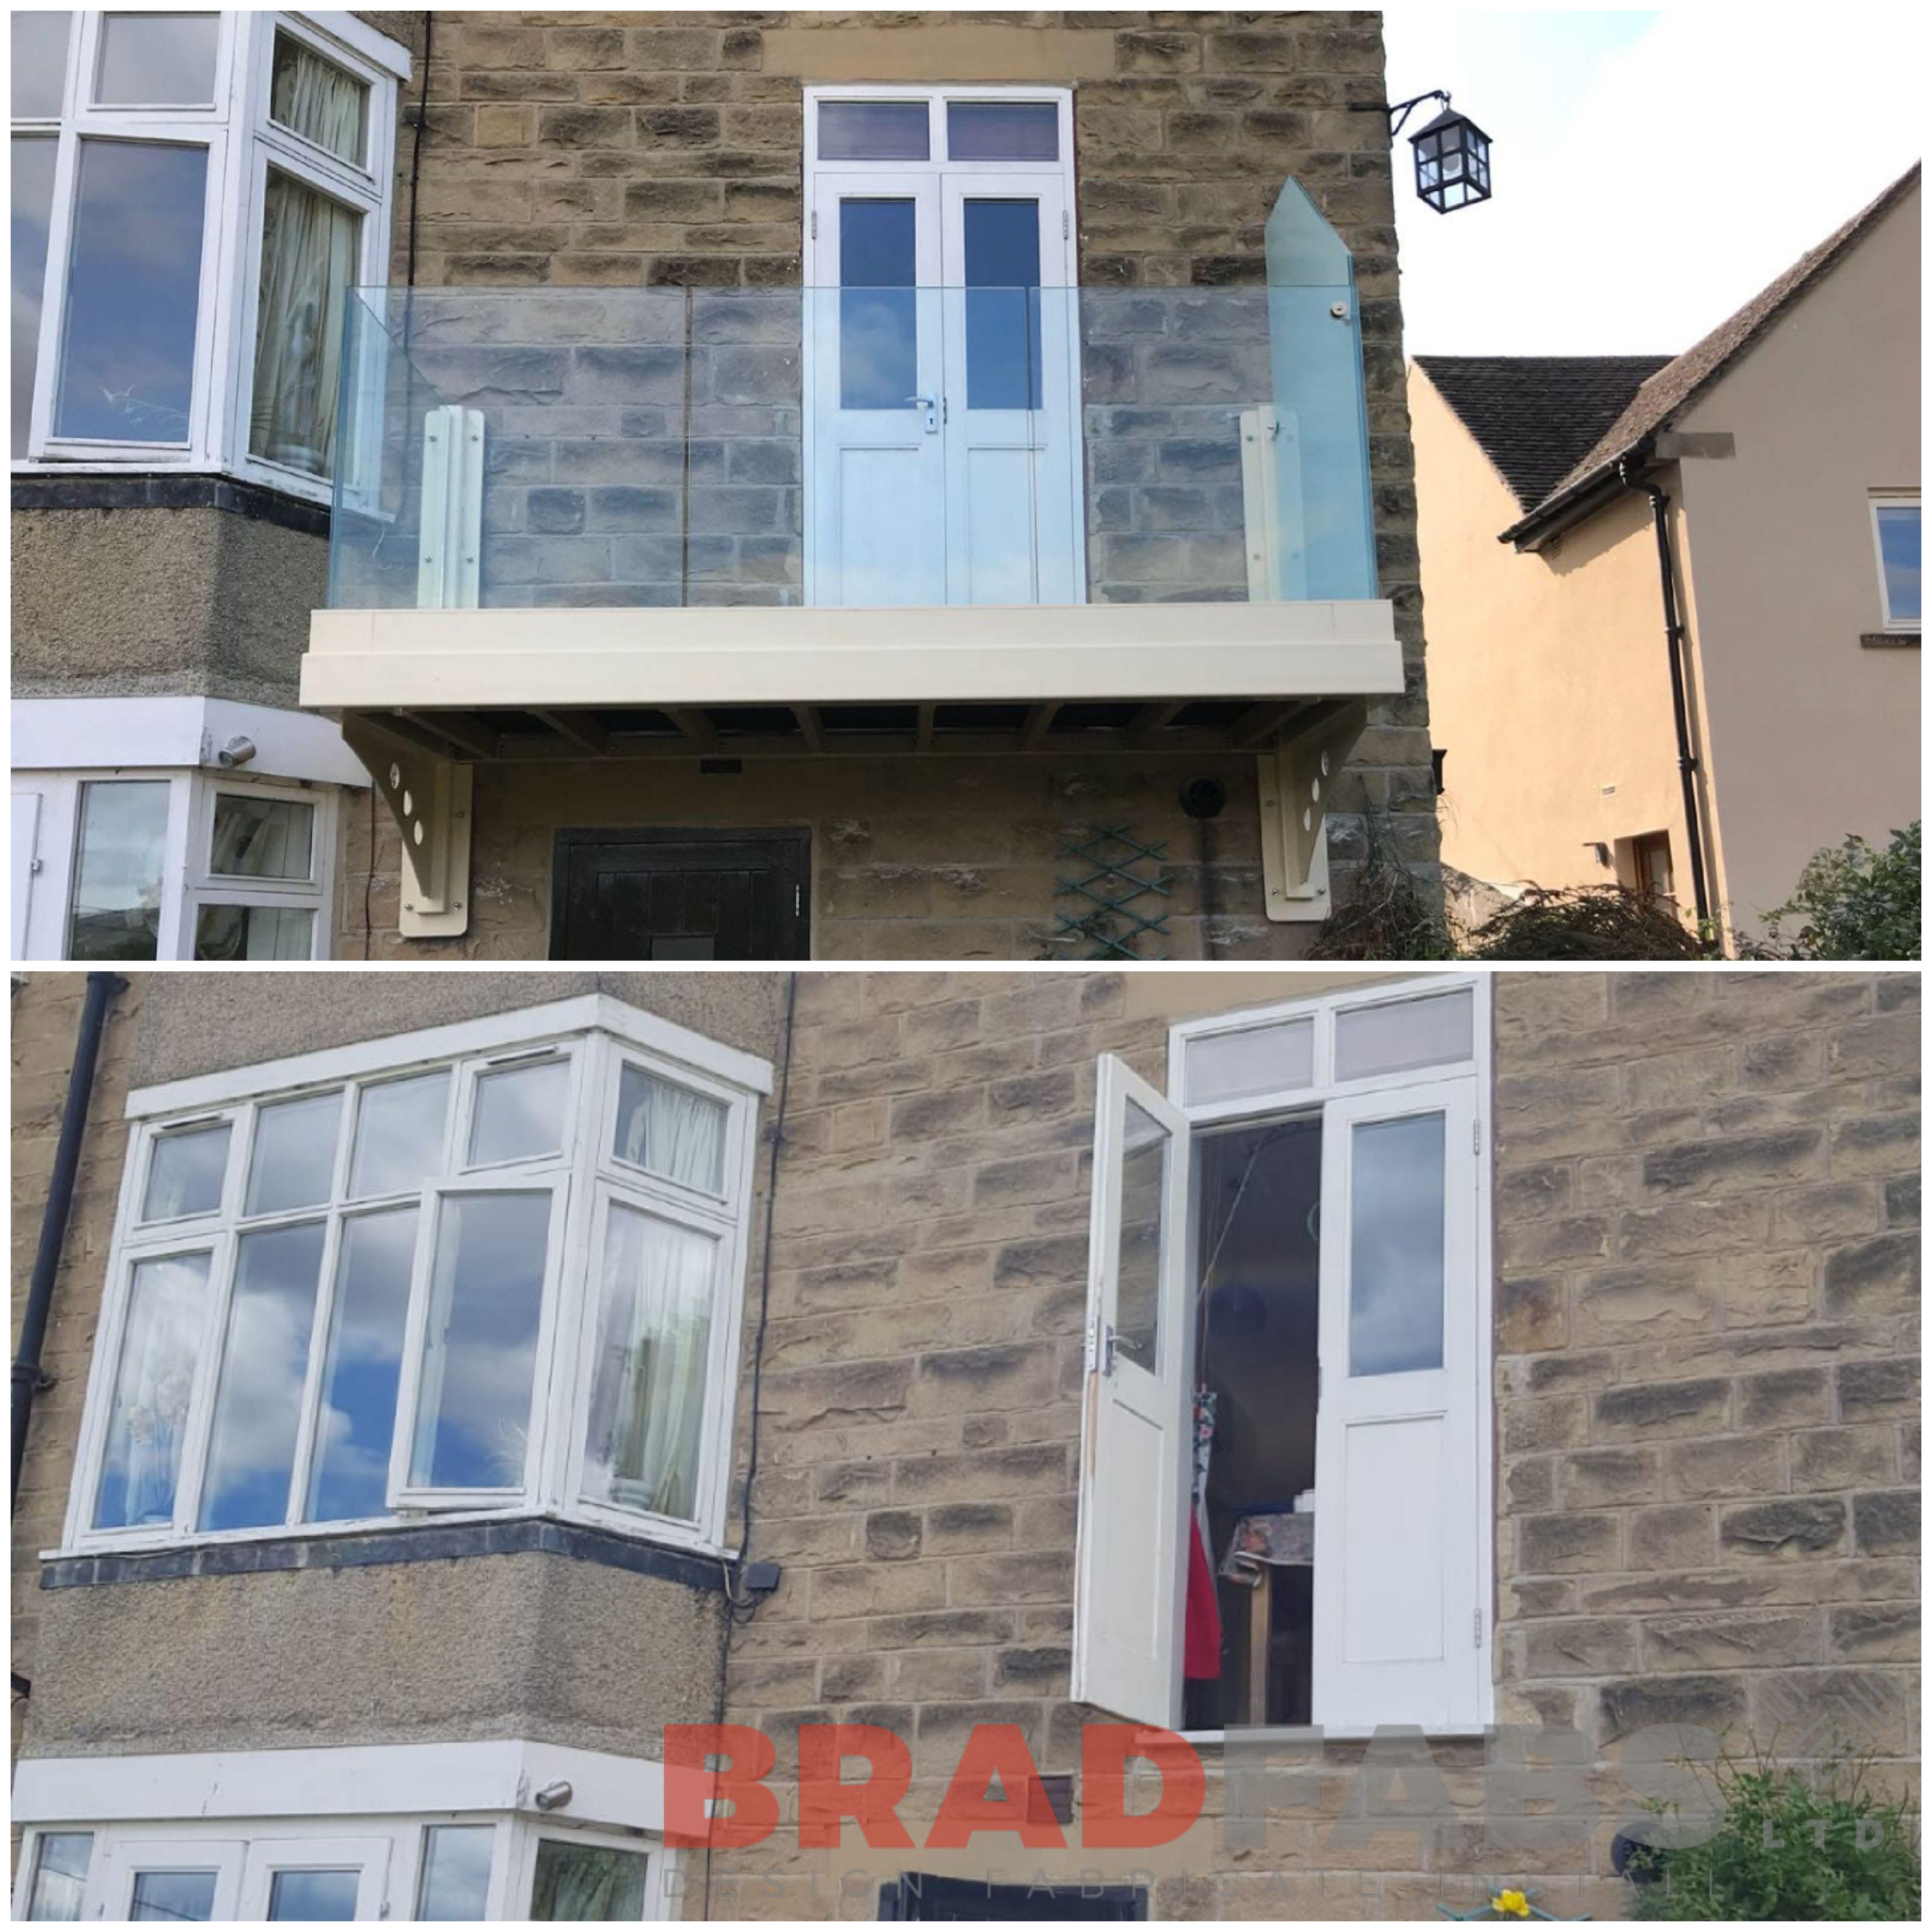 Beautiful transformation to our customers home with this stunning cantilevered balcony with infinity glass balustrade by Bradfabs 